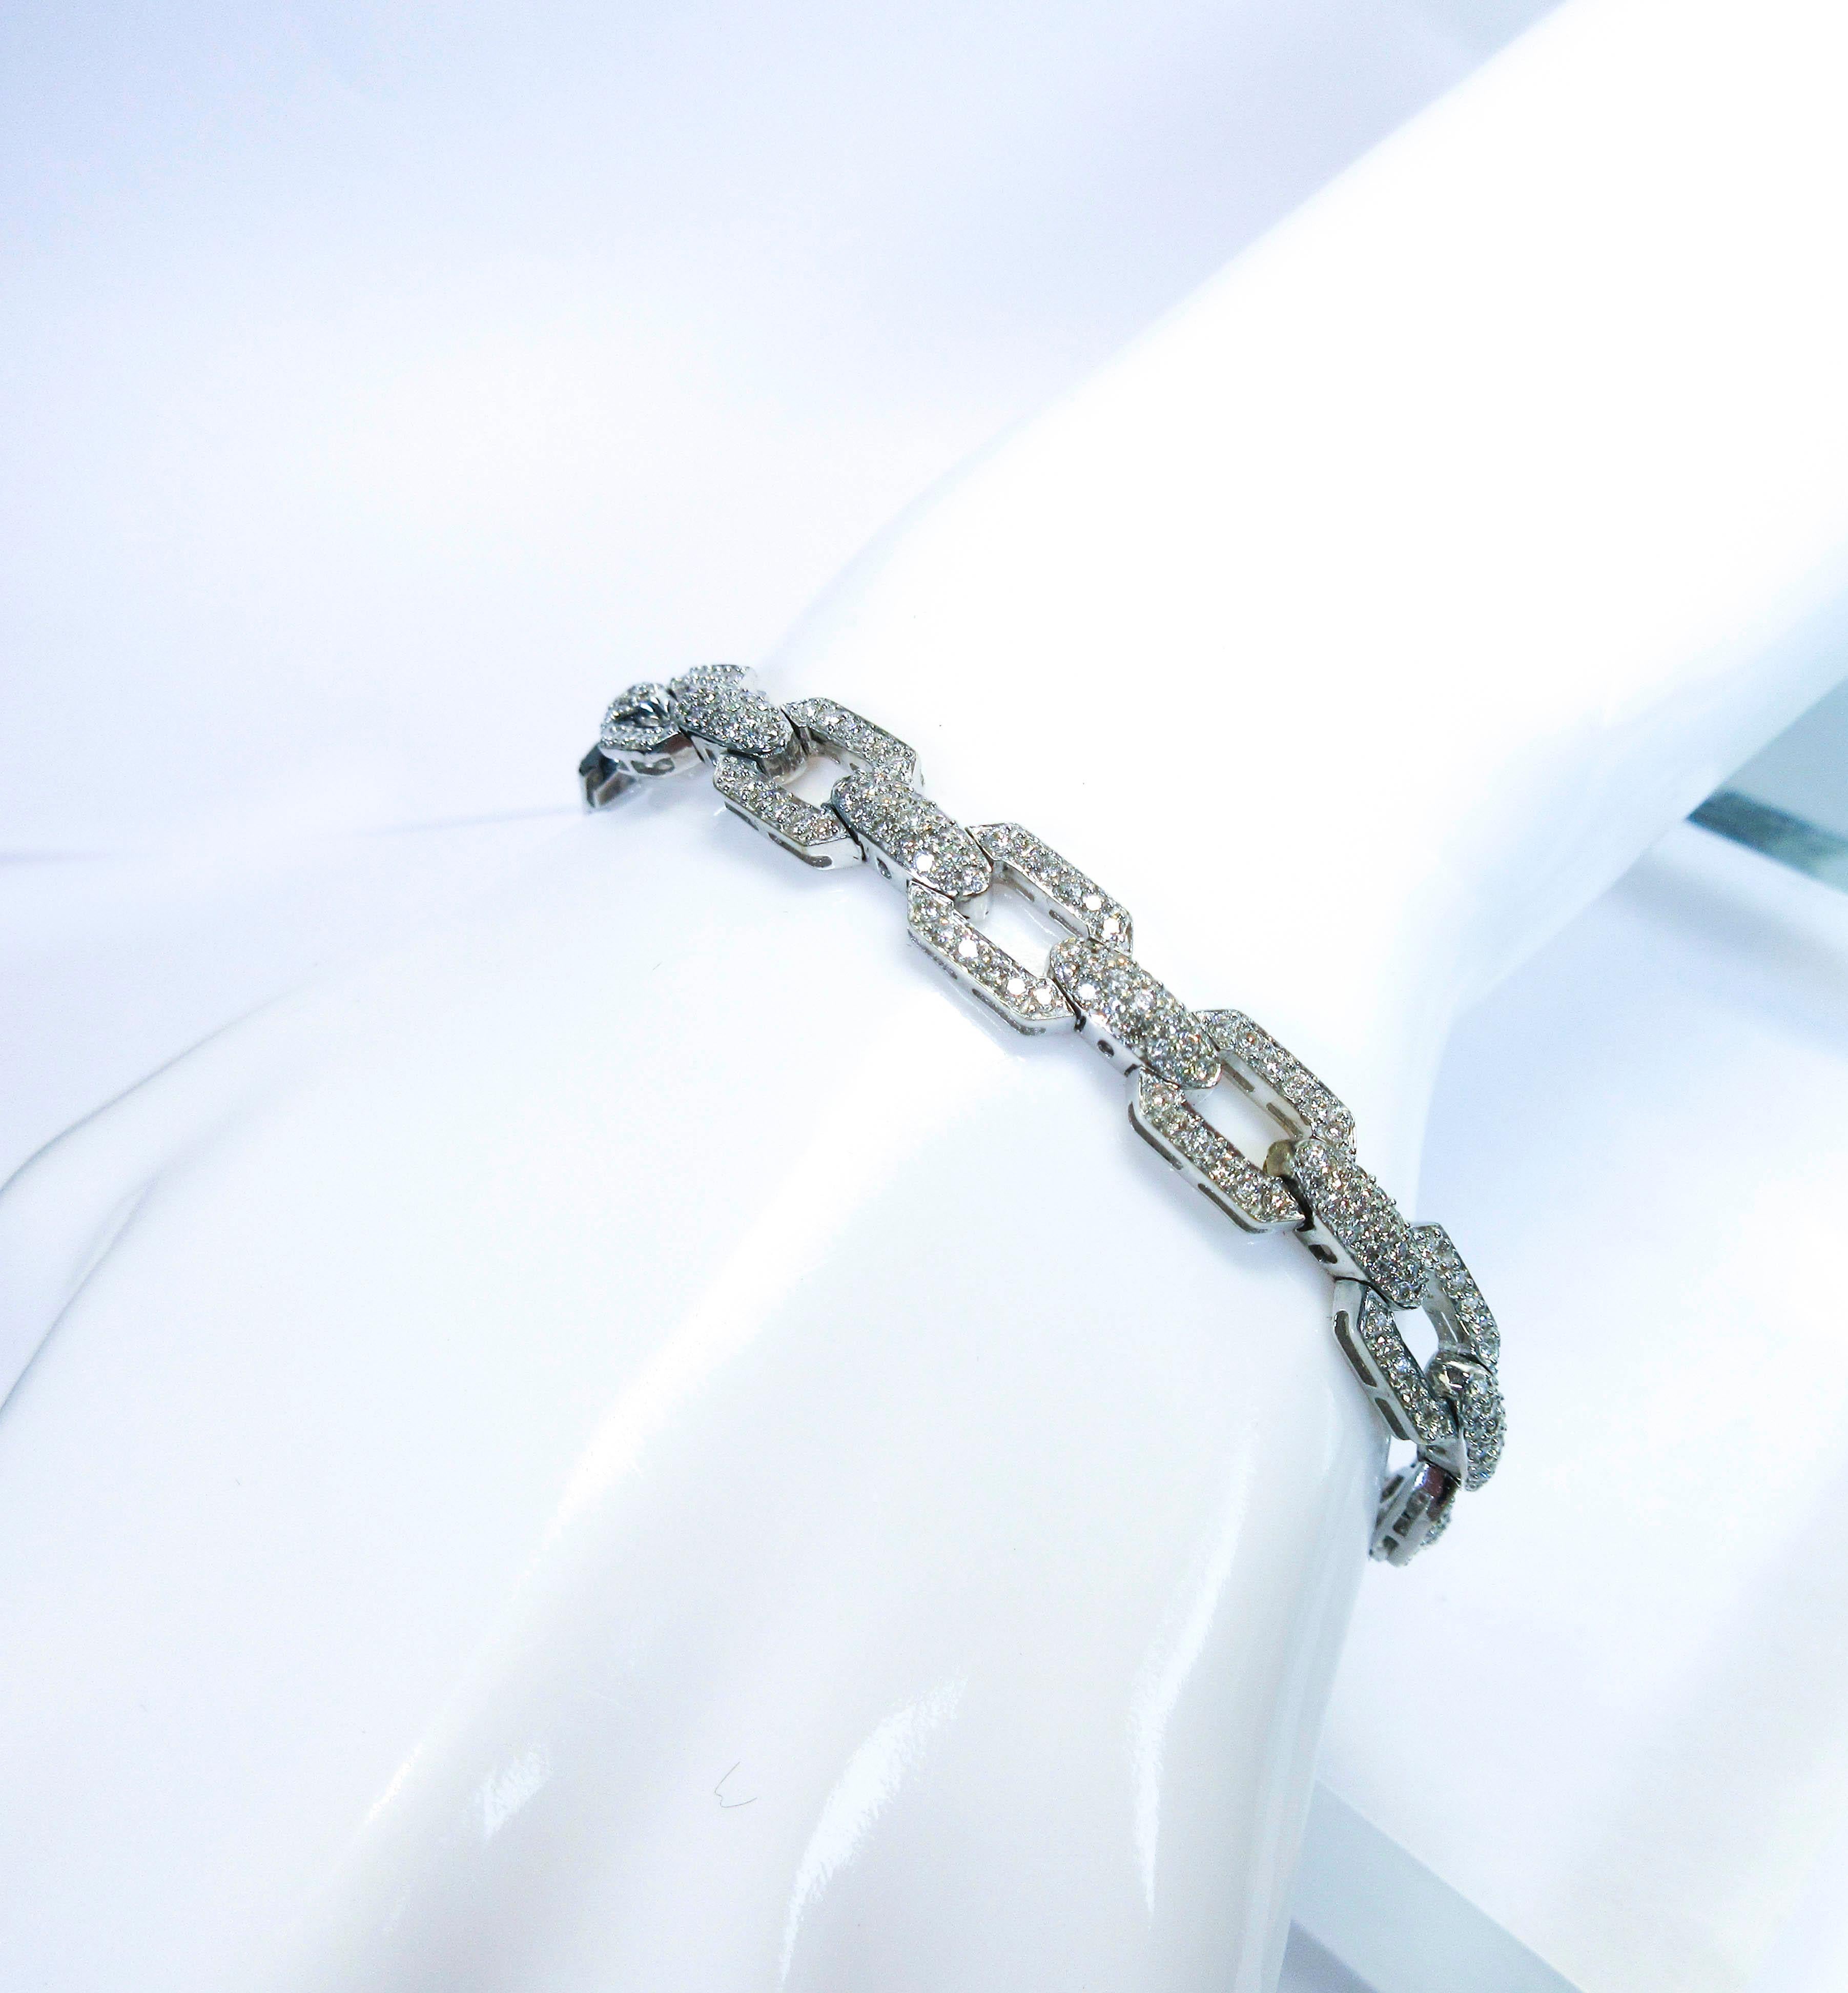 This gorgeous bracelet is composed of an 18kt white gold and features approximately 3.15cts of V-SI/H diamonds. It is approximately 7.5